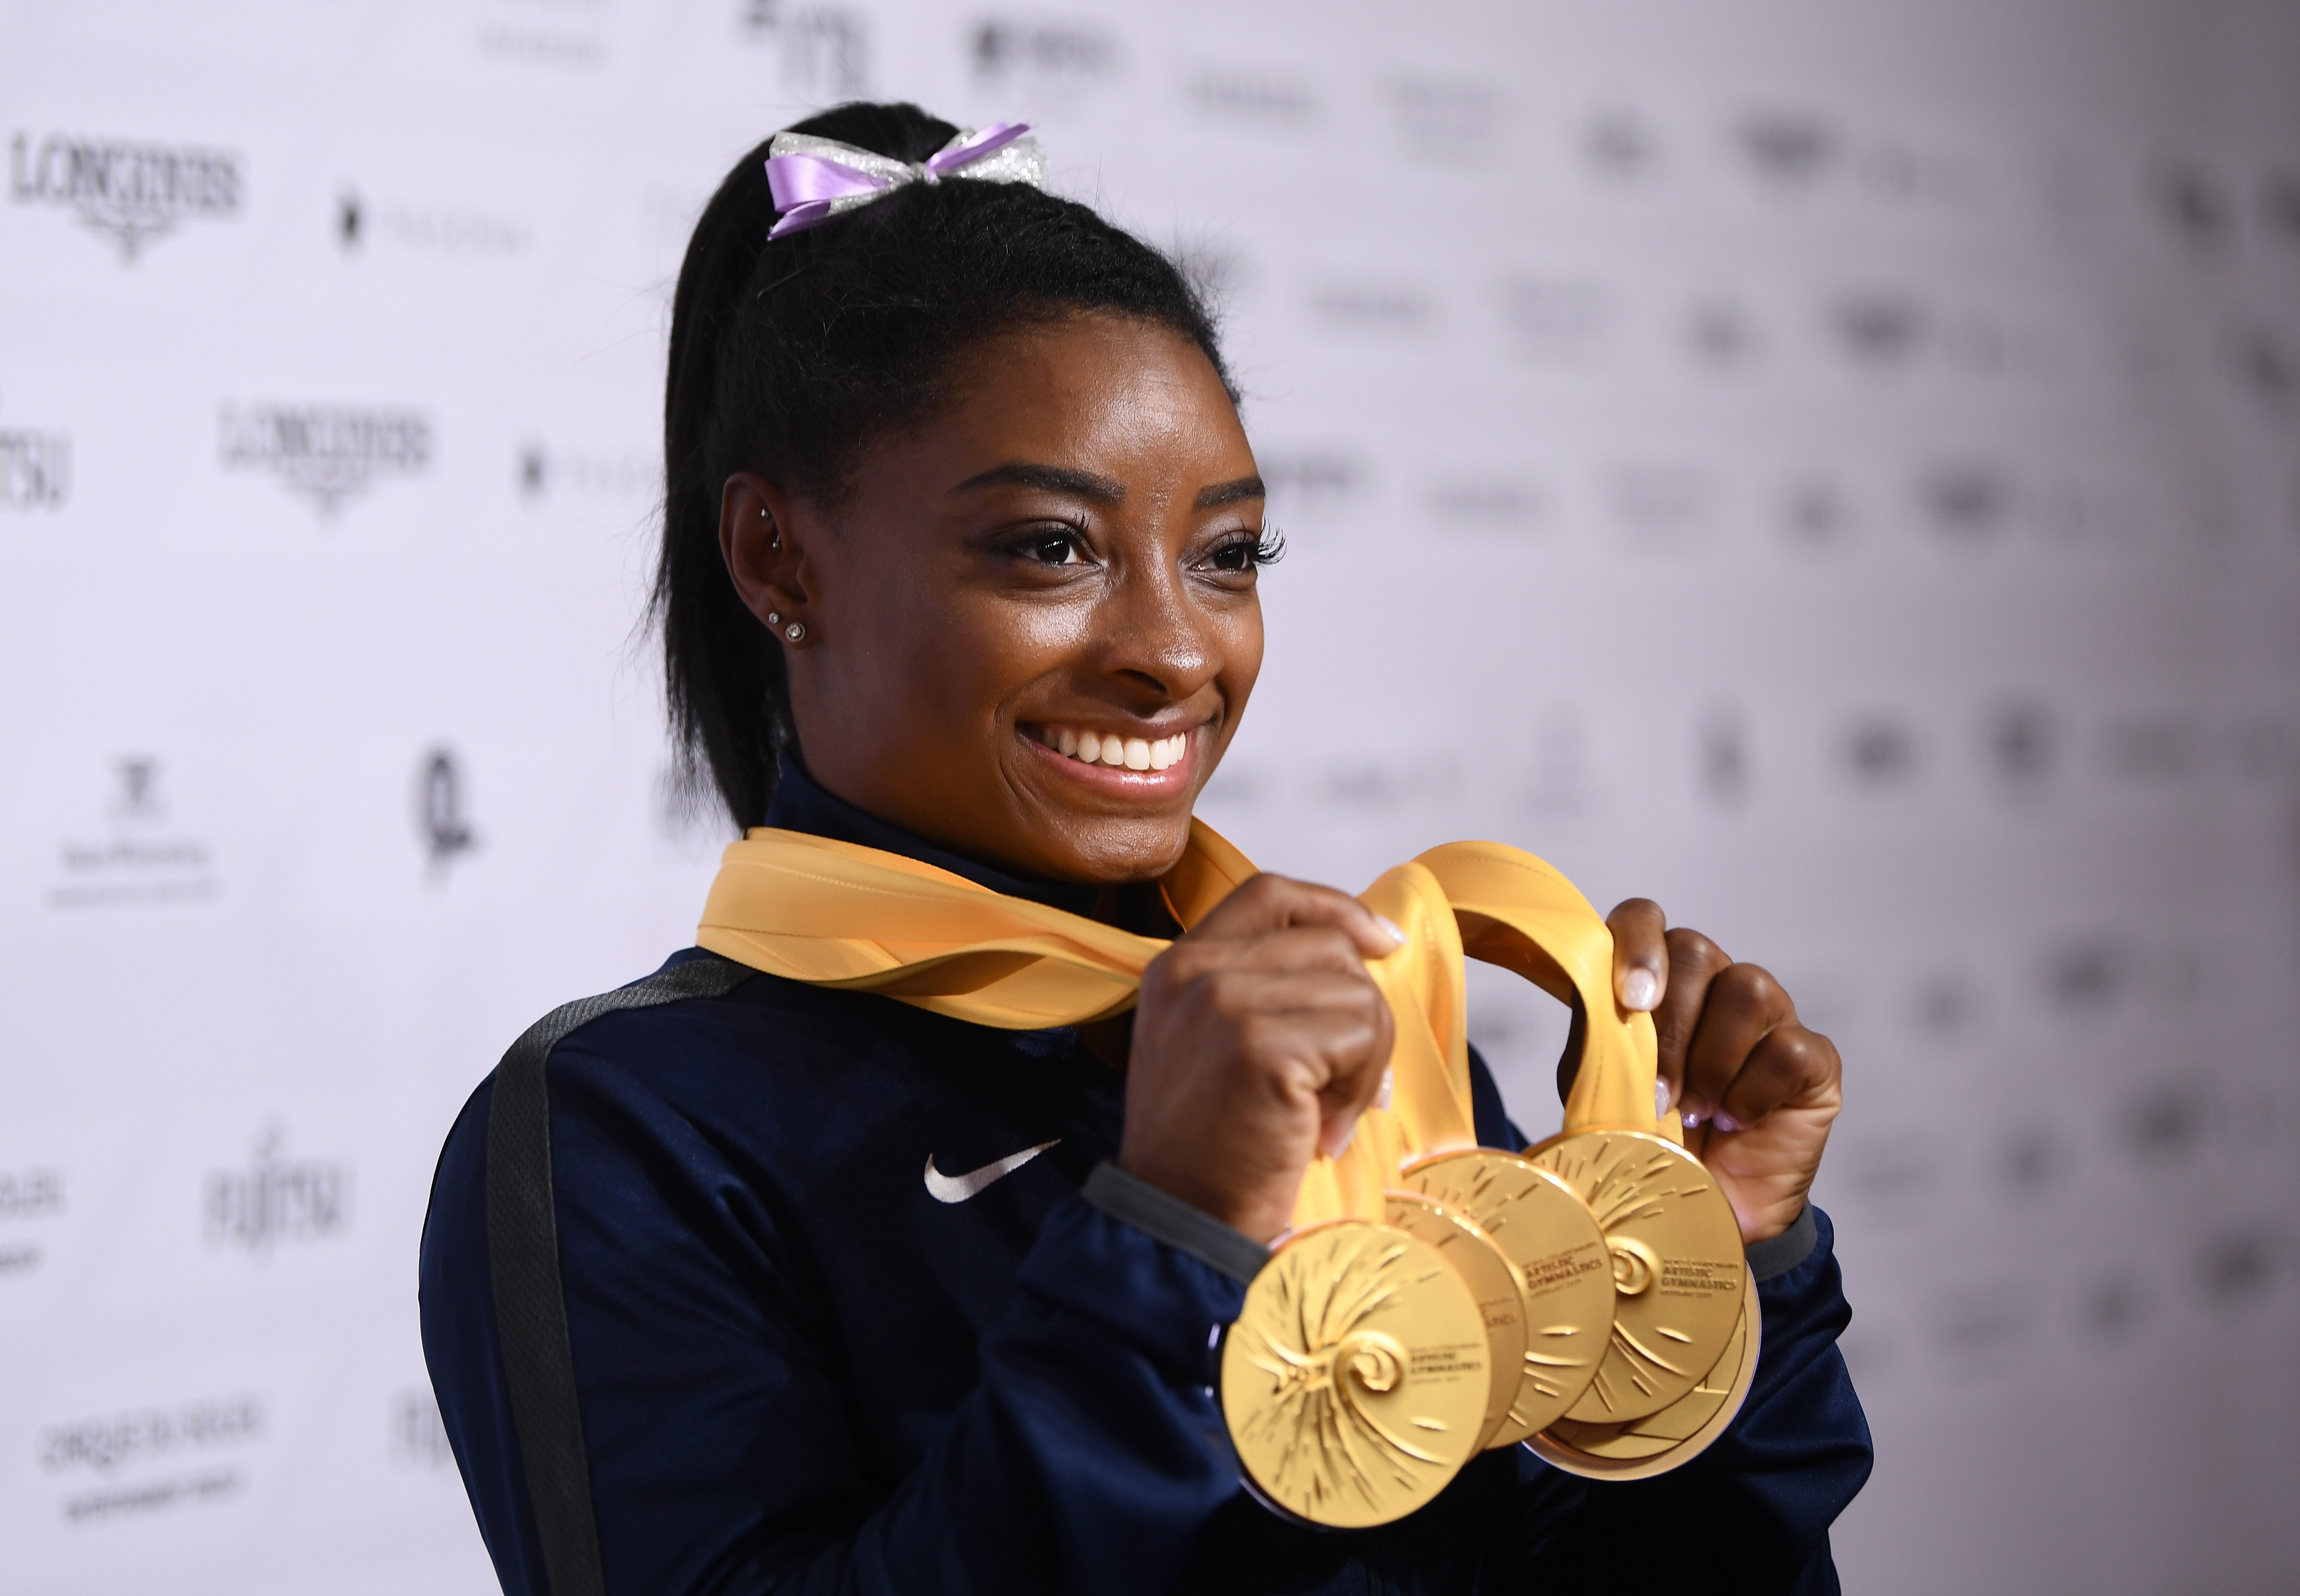 Simone Biles holding up her haul at the FIG Artistic Gymnastics World Championships in Stuttgart, Germany on October 13, 2019. | Photo: Getty Images